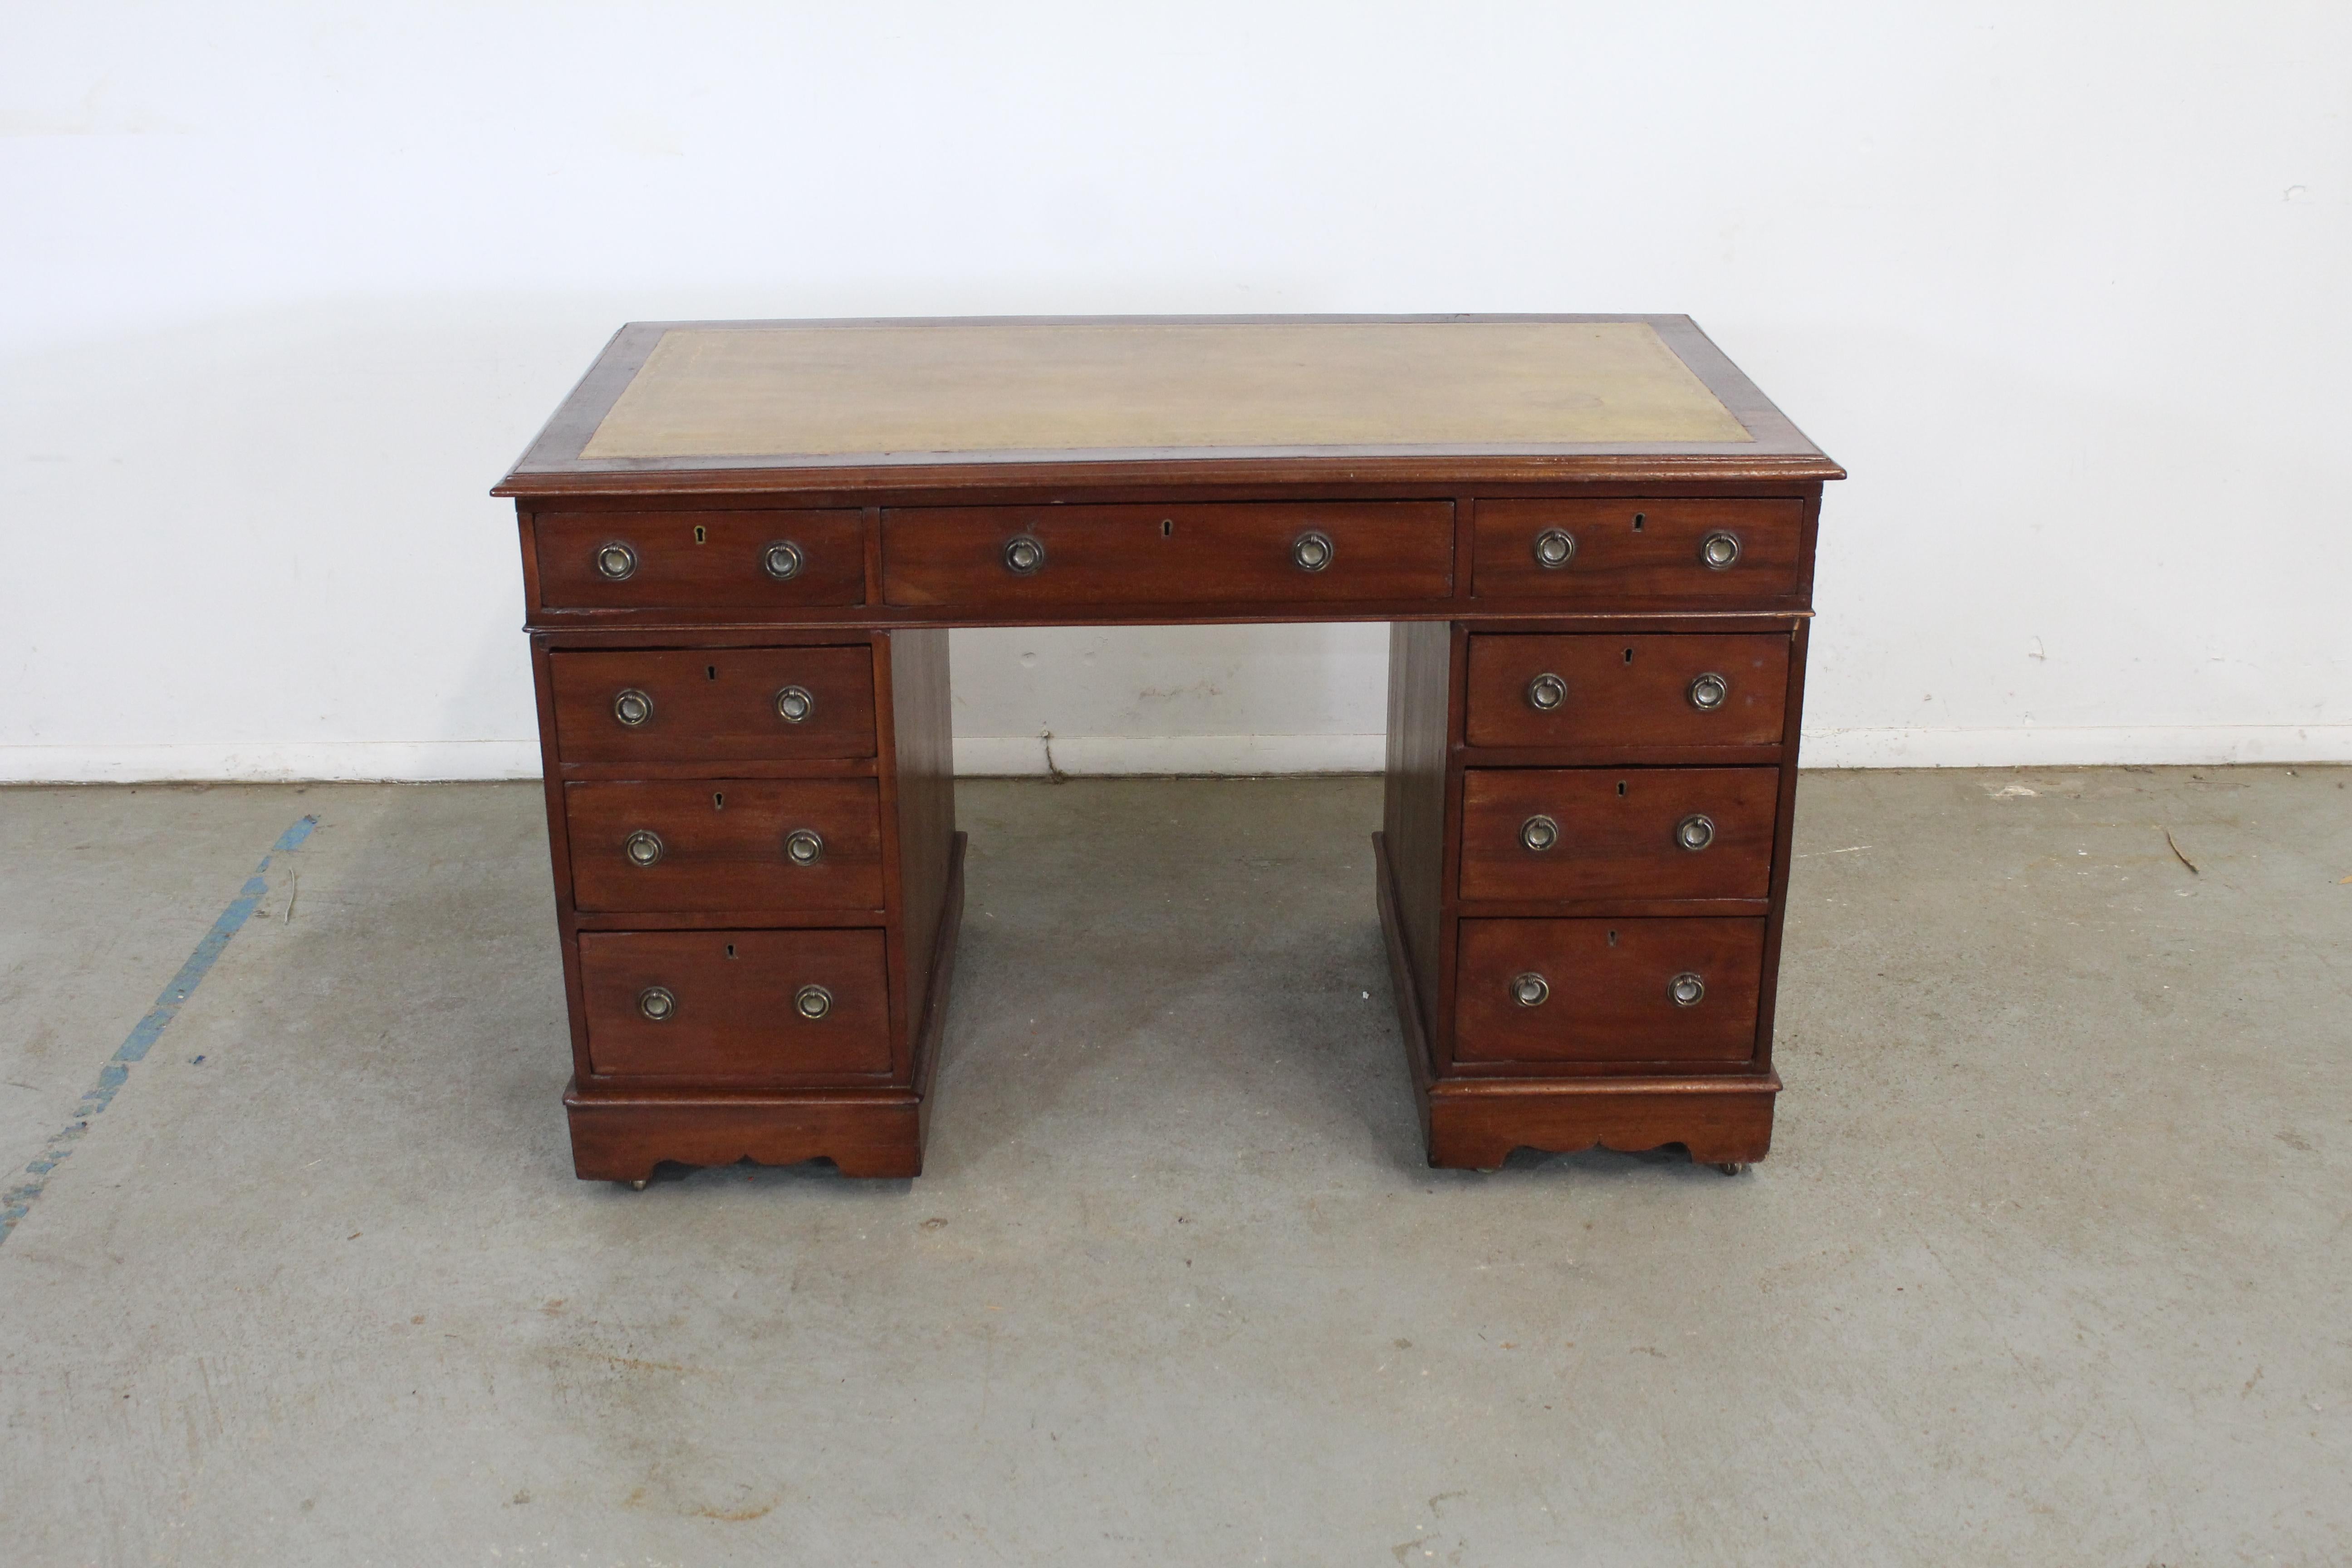 Antique English mahogany leather top pedestal desk




This is very well made and of excellent quality. Great size, and quite small proportions for a pedestal desk. The pedestals sit on bases with concealed casters, and this has beautiful solid